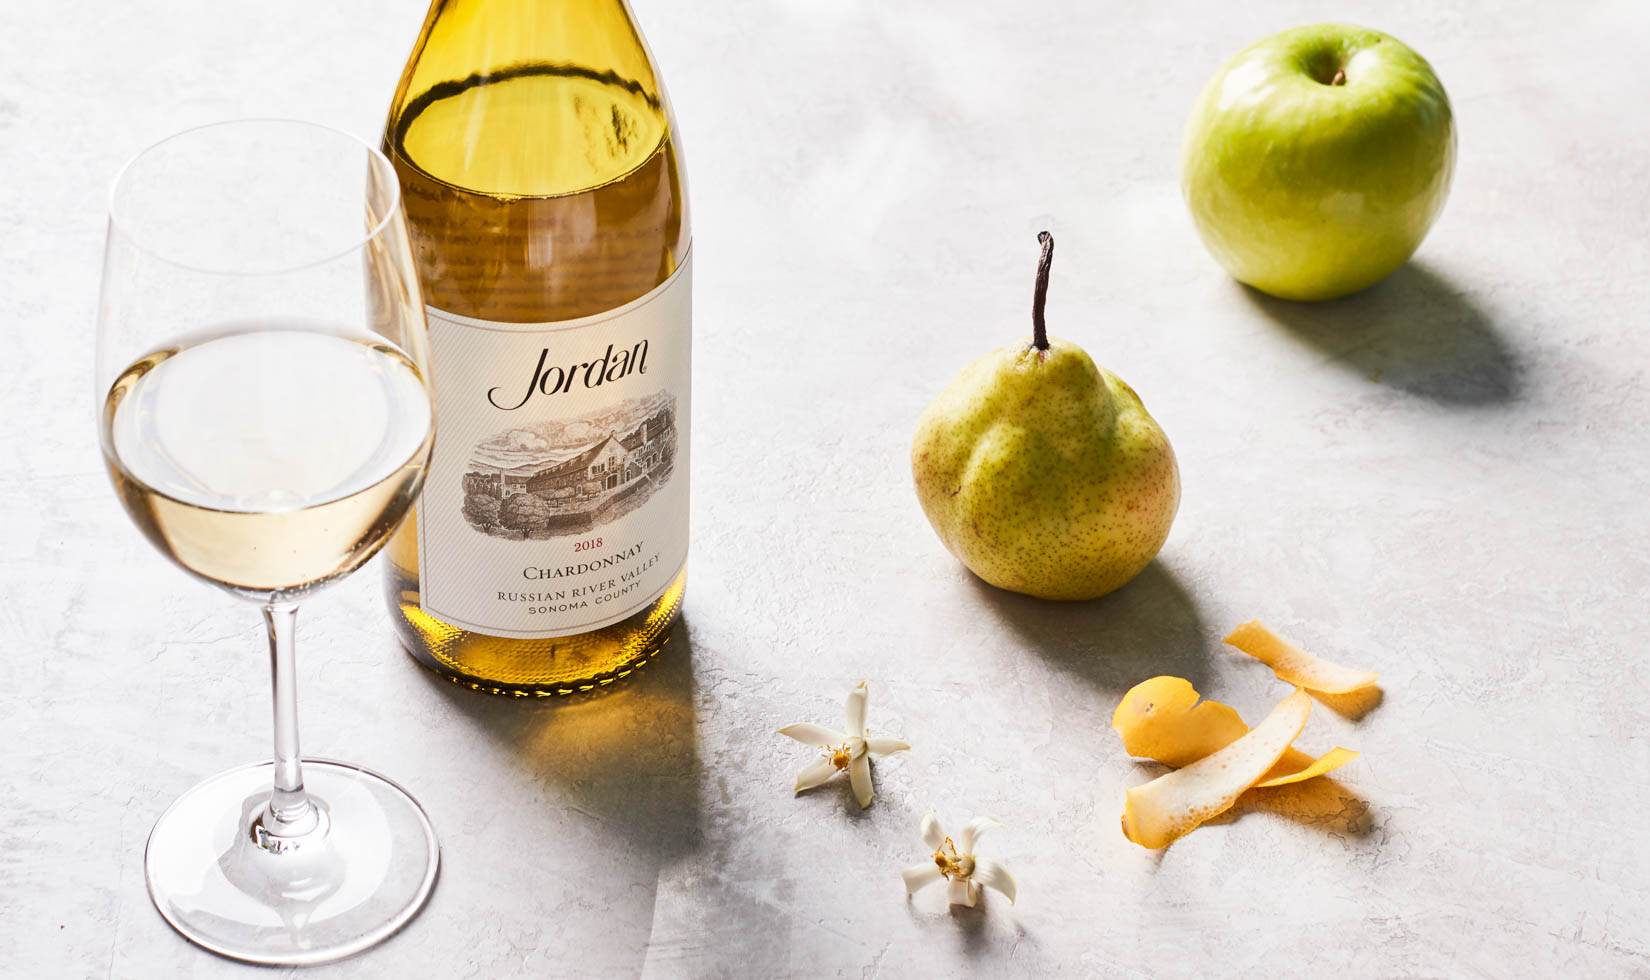 Jordan Winery 2018 Chardonnay next to a pear and a green apple